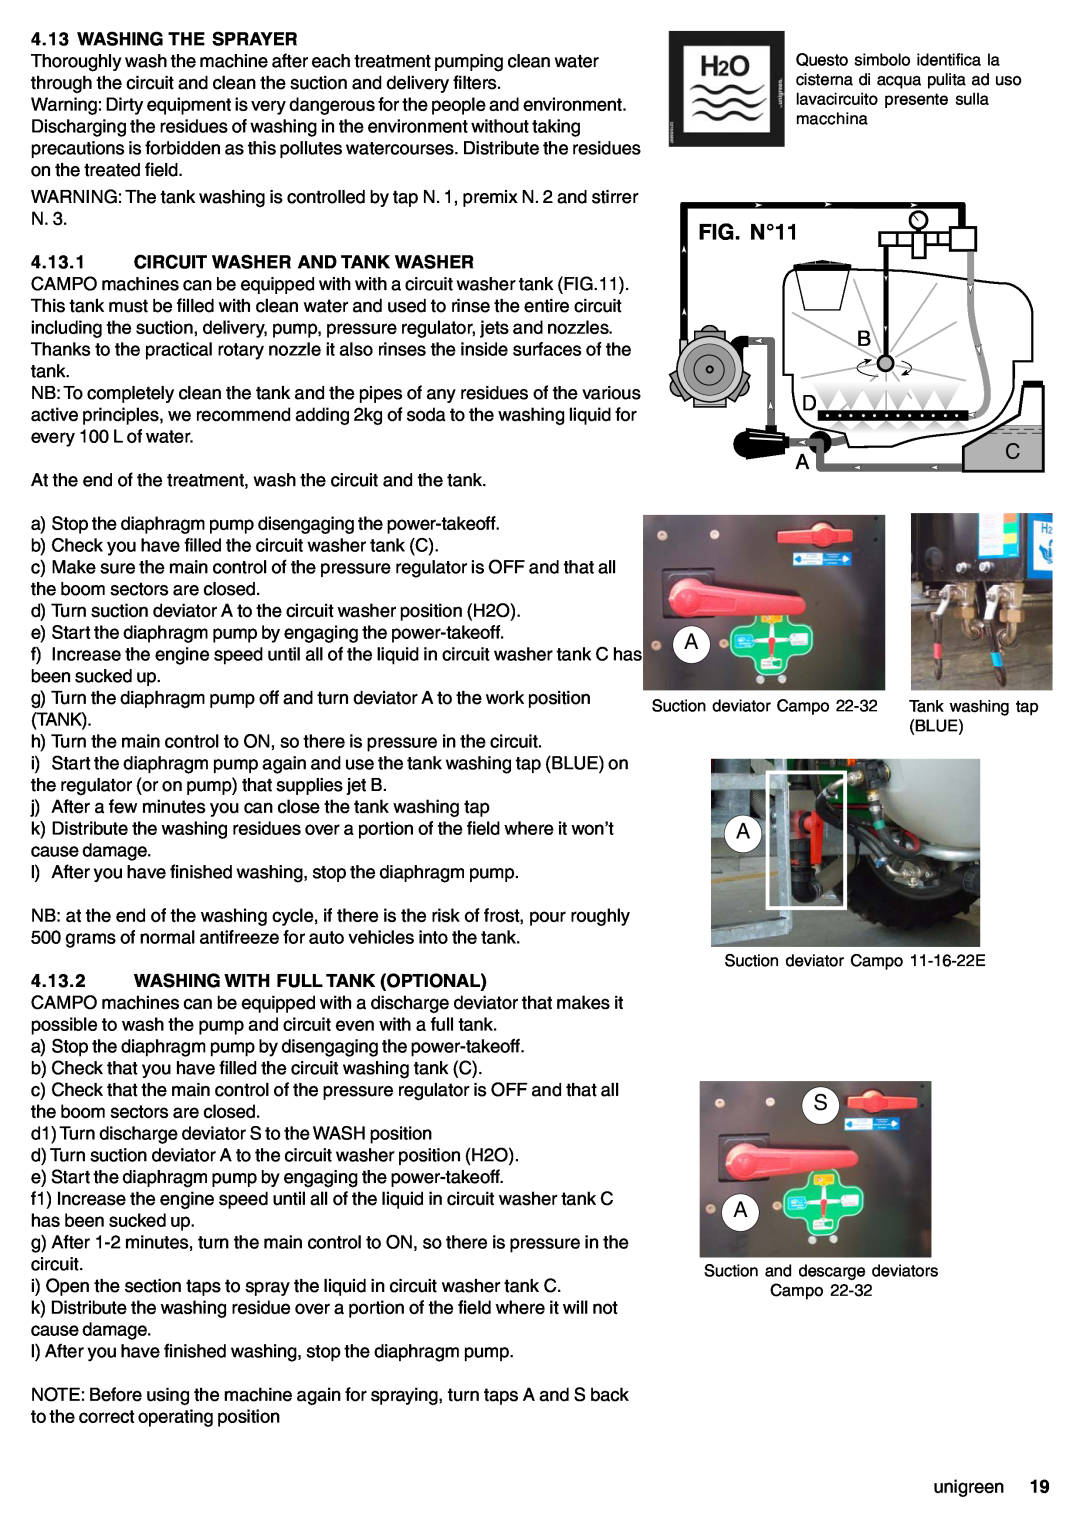 Unigreen 32, 22 FIG. N11, Washing The Sprayer, 4.13.1CIRCUIT WASHER AND TANK WASHER, 4.13.2WASHING WITH FULL TANK OPTIONAL 